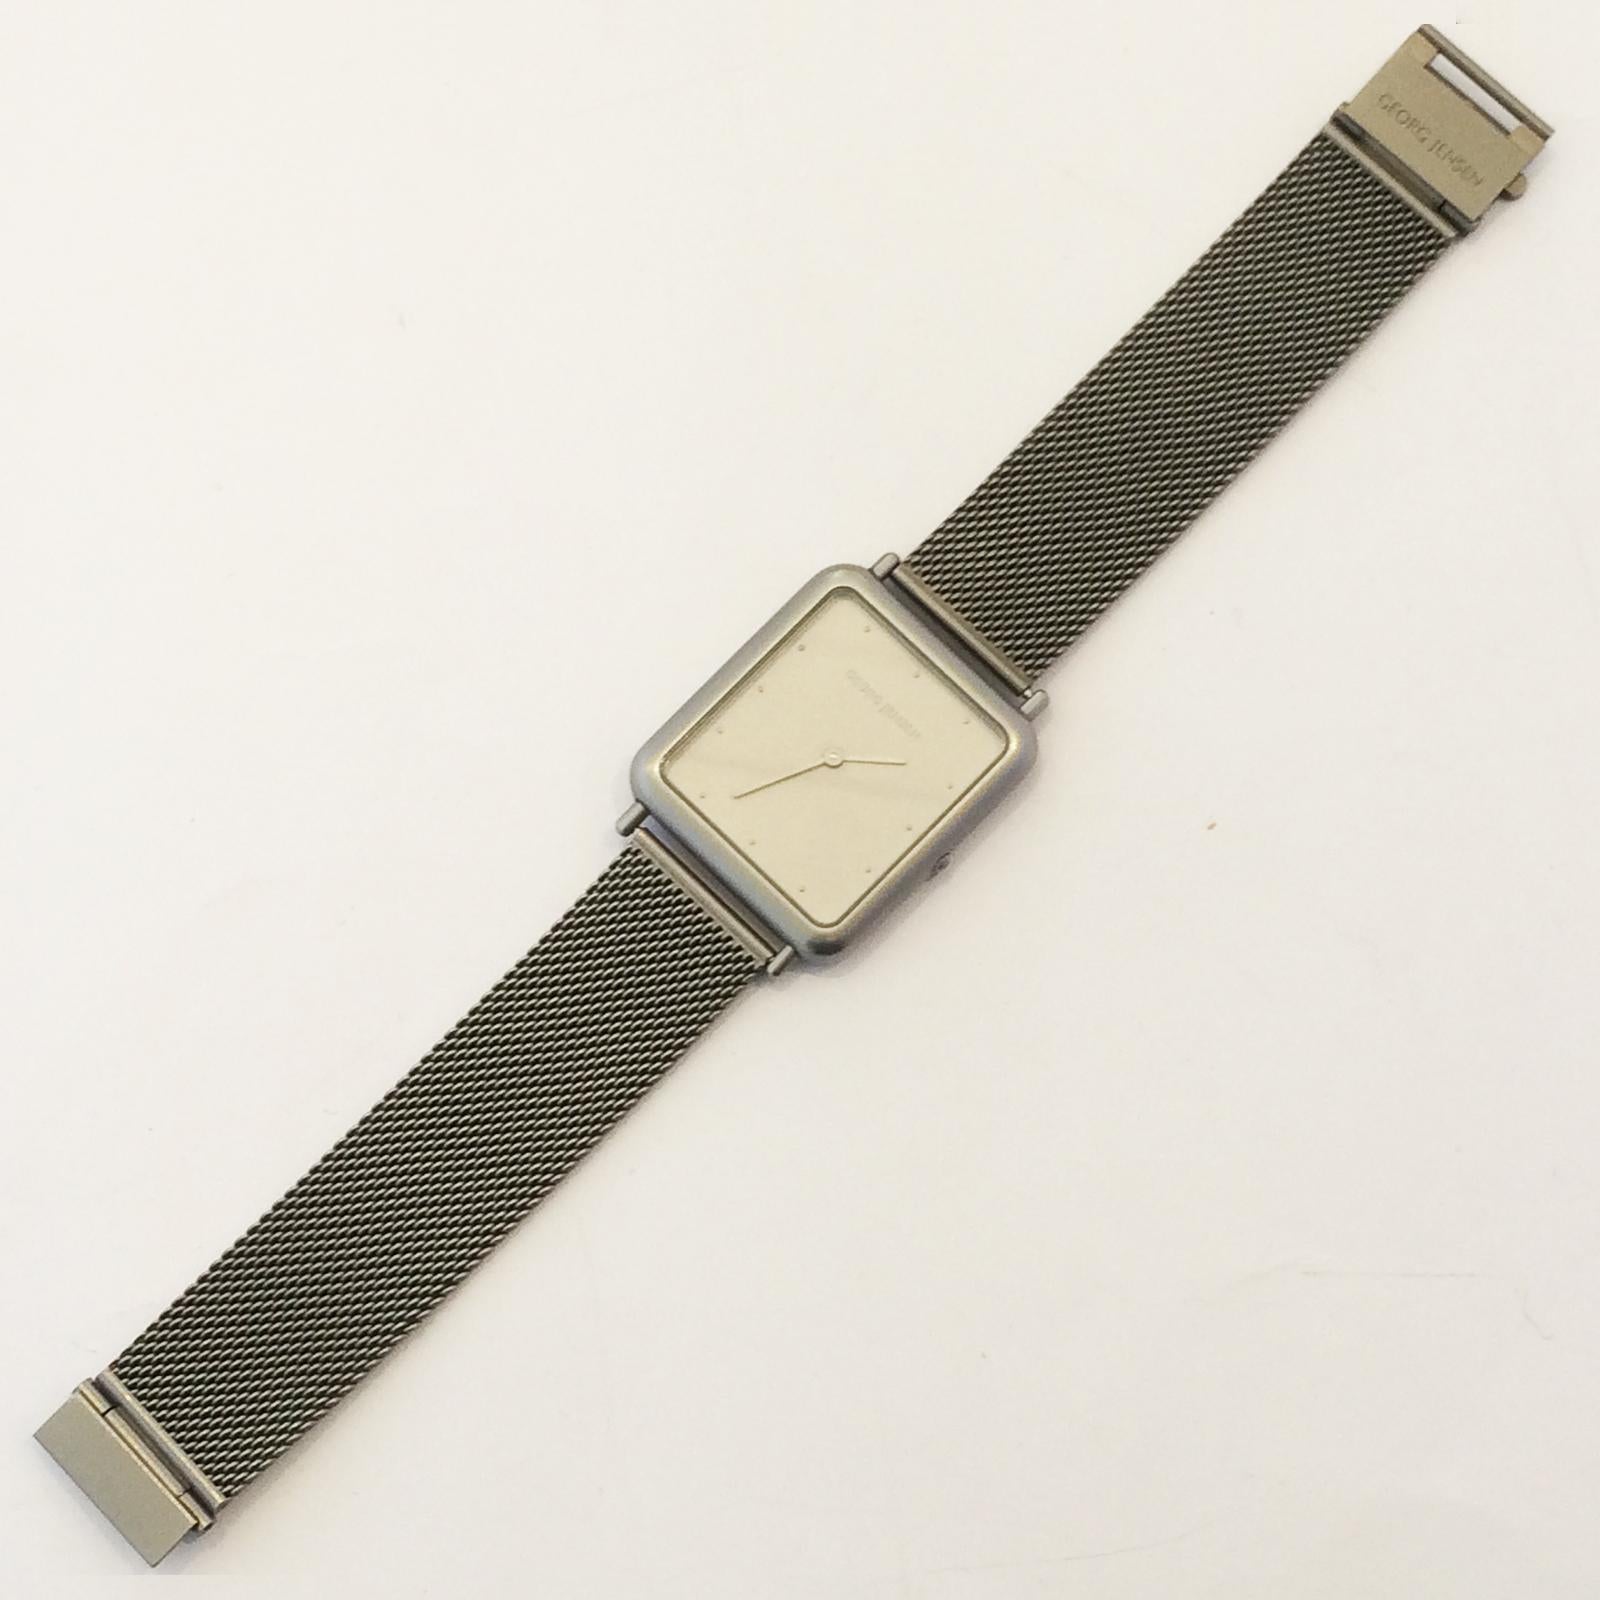 Original Georg Jensen Watch by Thorup & Bonderup, Quartz movement in pristine condition and keeping perfect time. It has a wonderful satin grey metal finish which in itself looks very elegant, particularly with the fine Chain Mail Band . Very simple